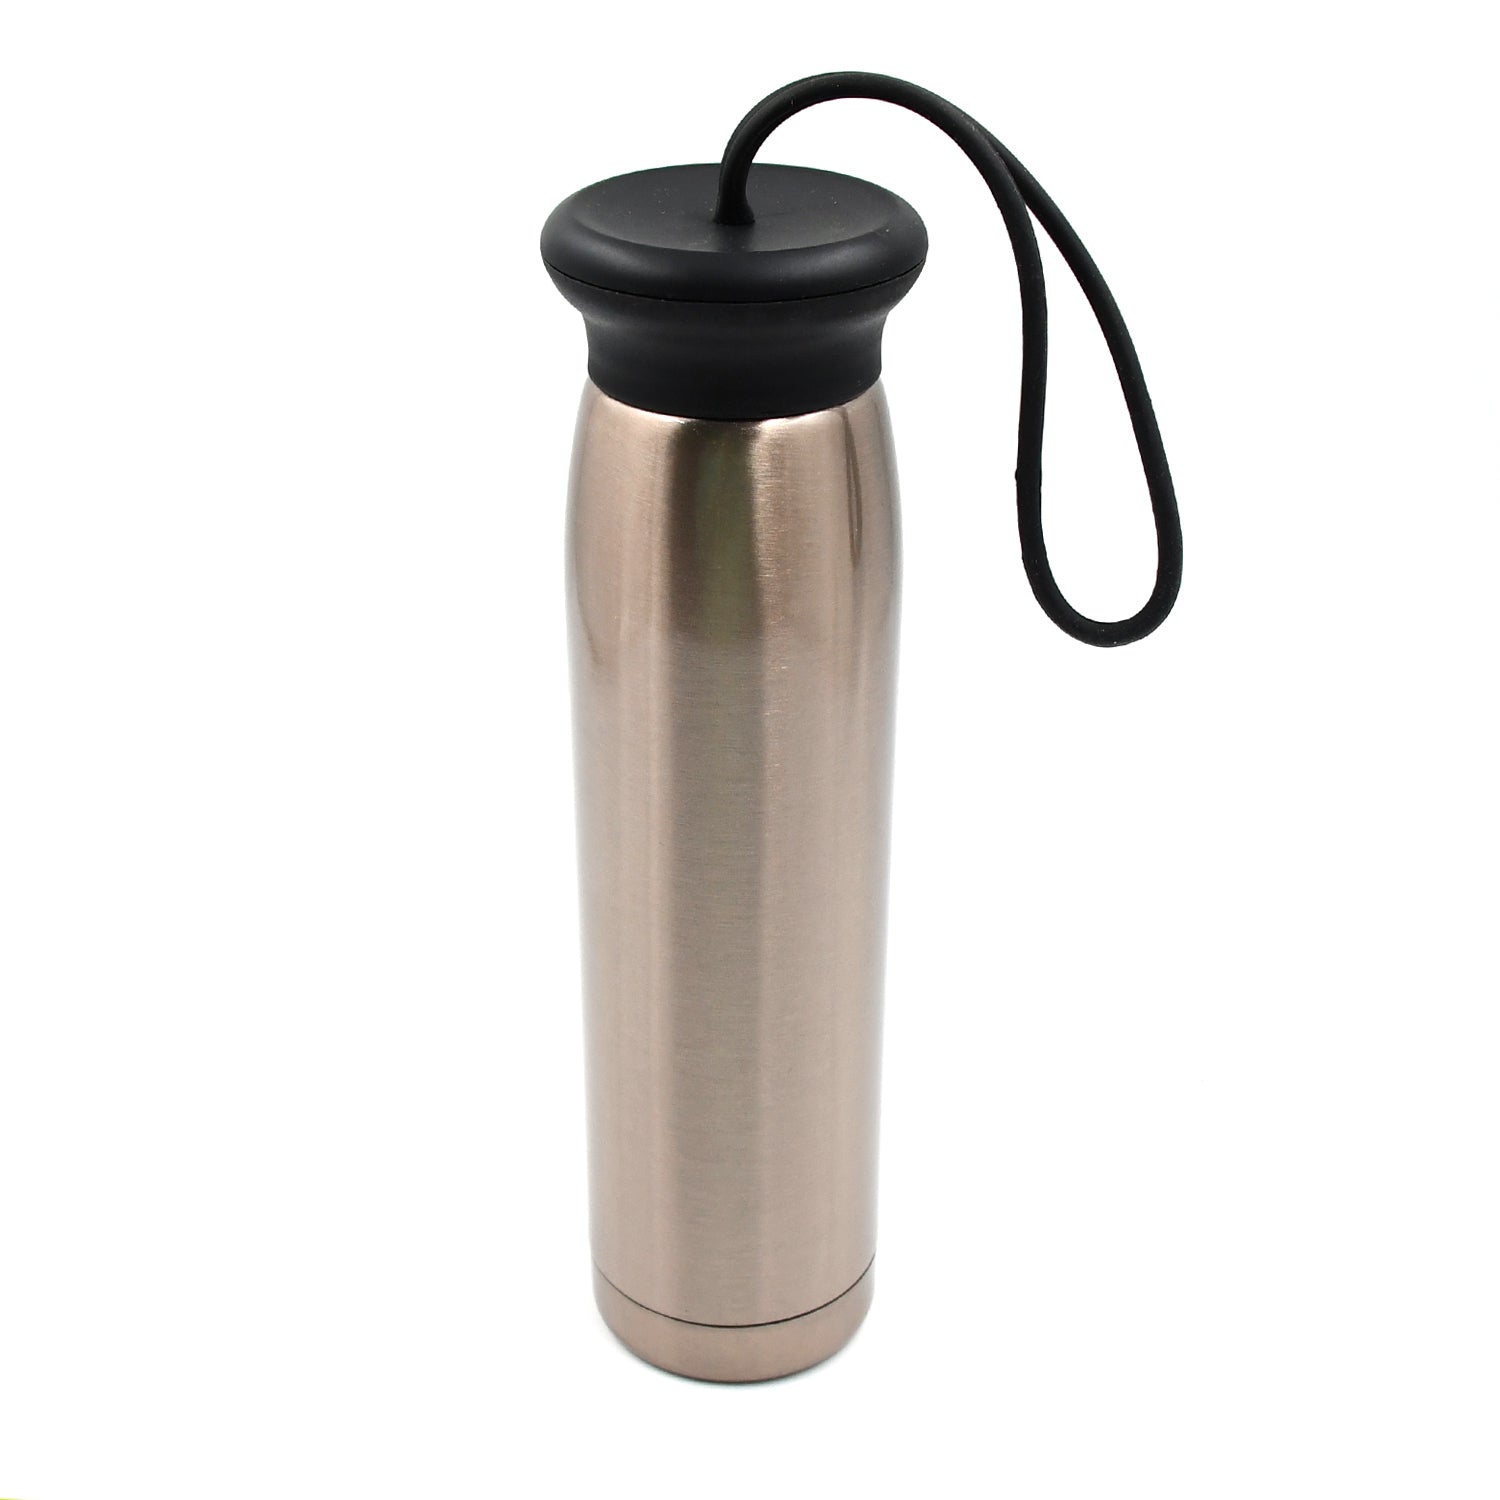 Insulated Flask | Hot and Cold Stainless Steel Water Bottle | Double Walled Carry Flask for Travel, Home, Office, School | 320 ml